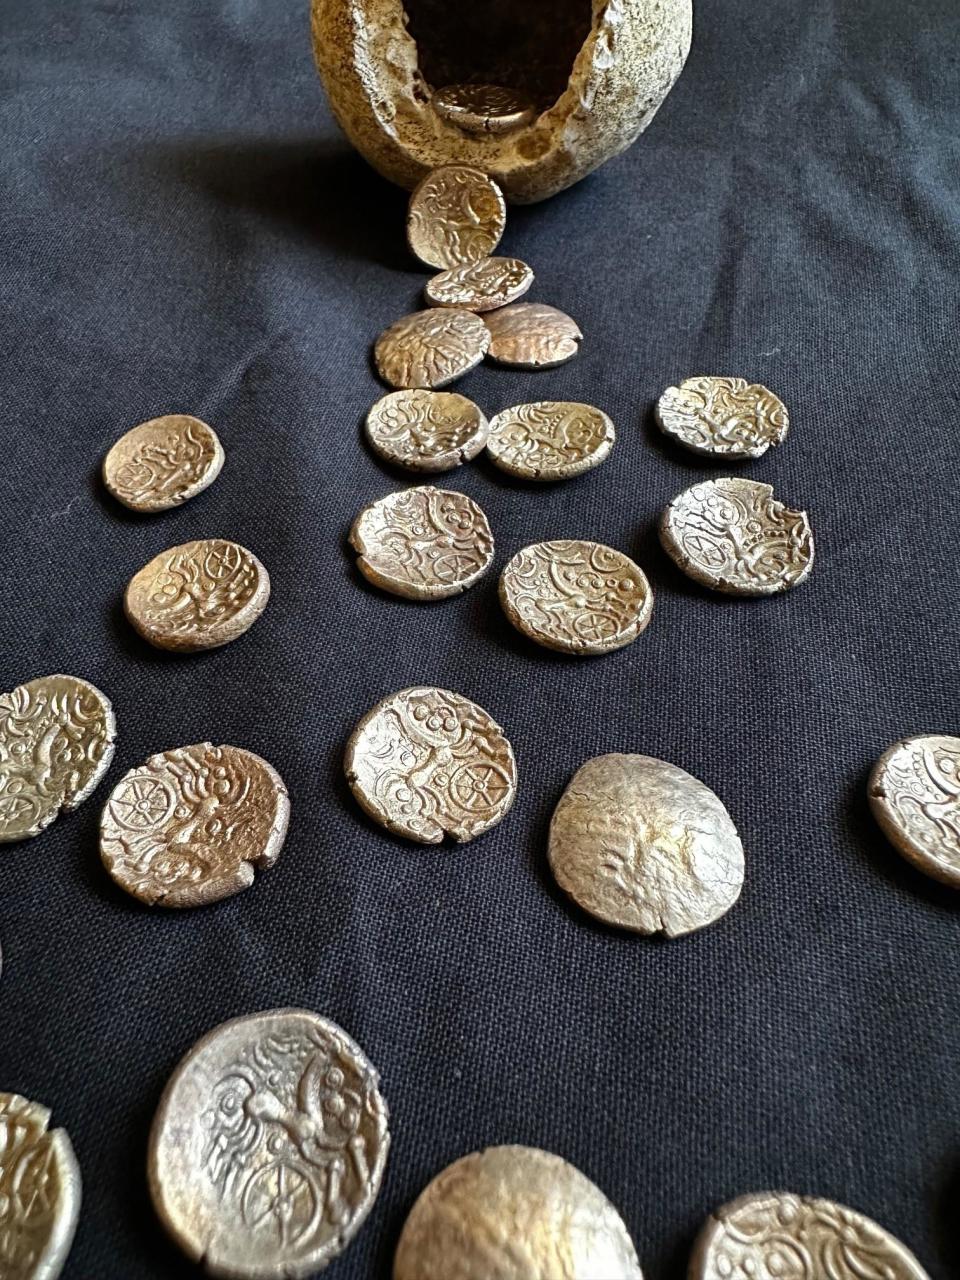 The coin hoard reported to the British Museum. / Credit: The British Museum